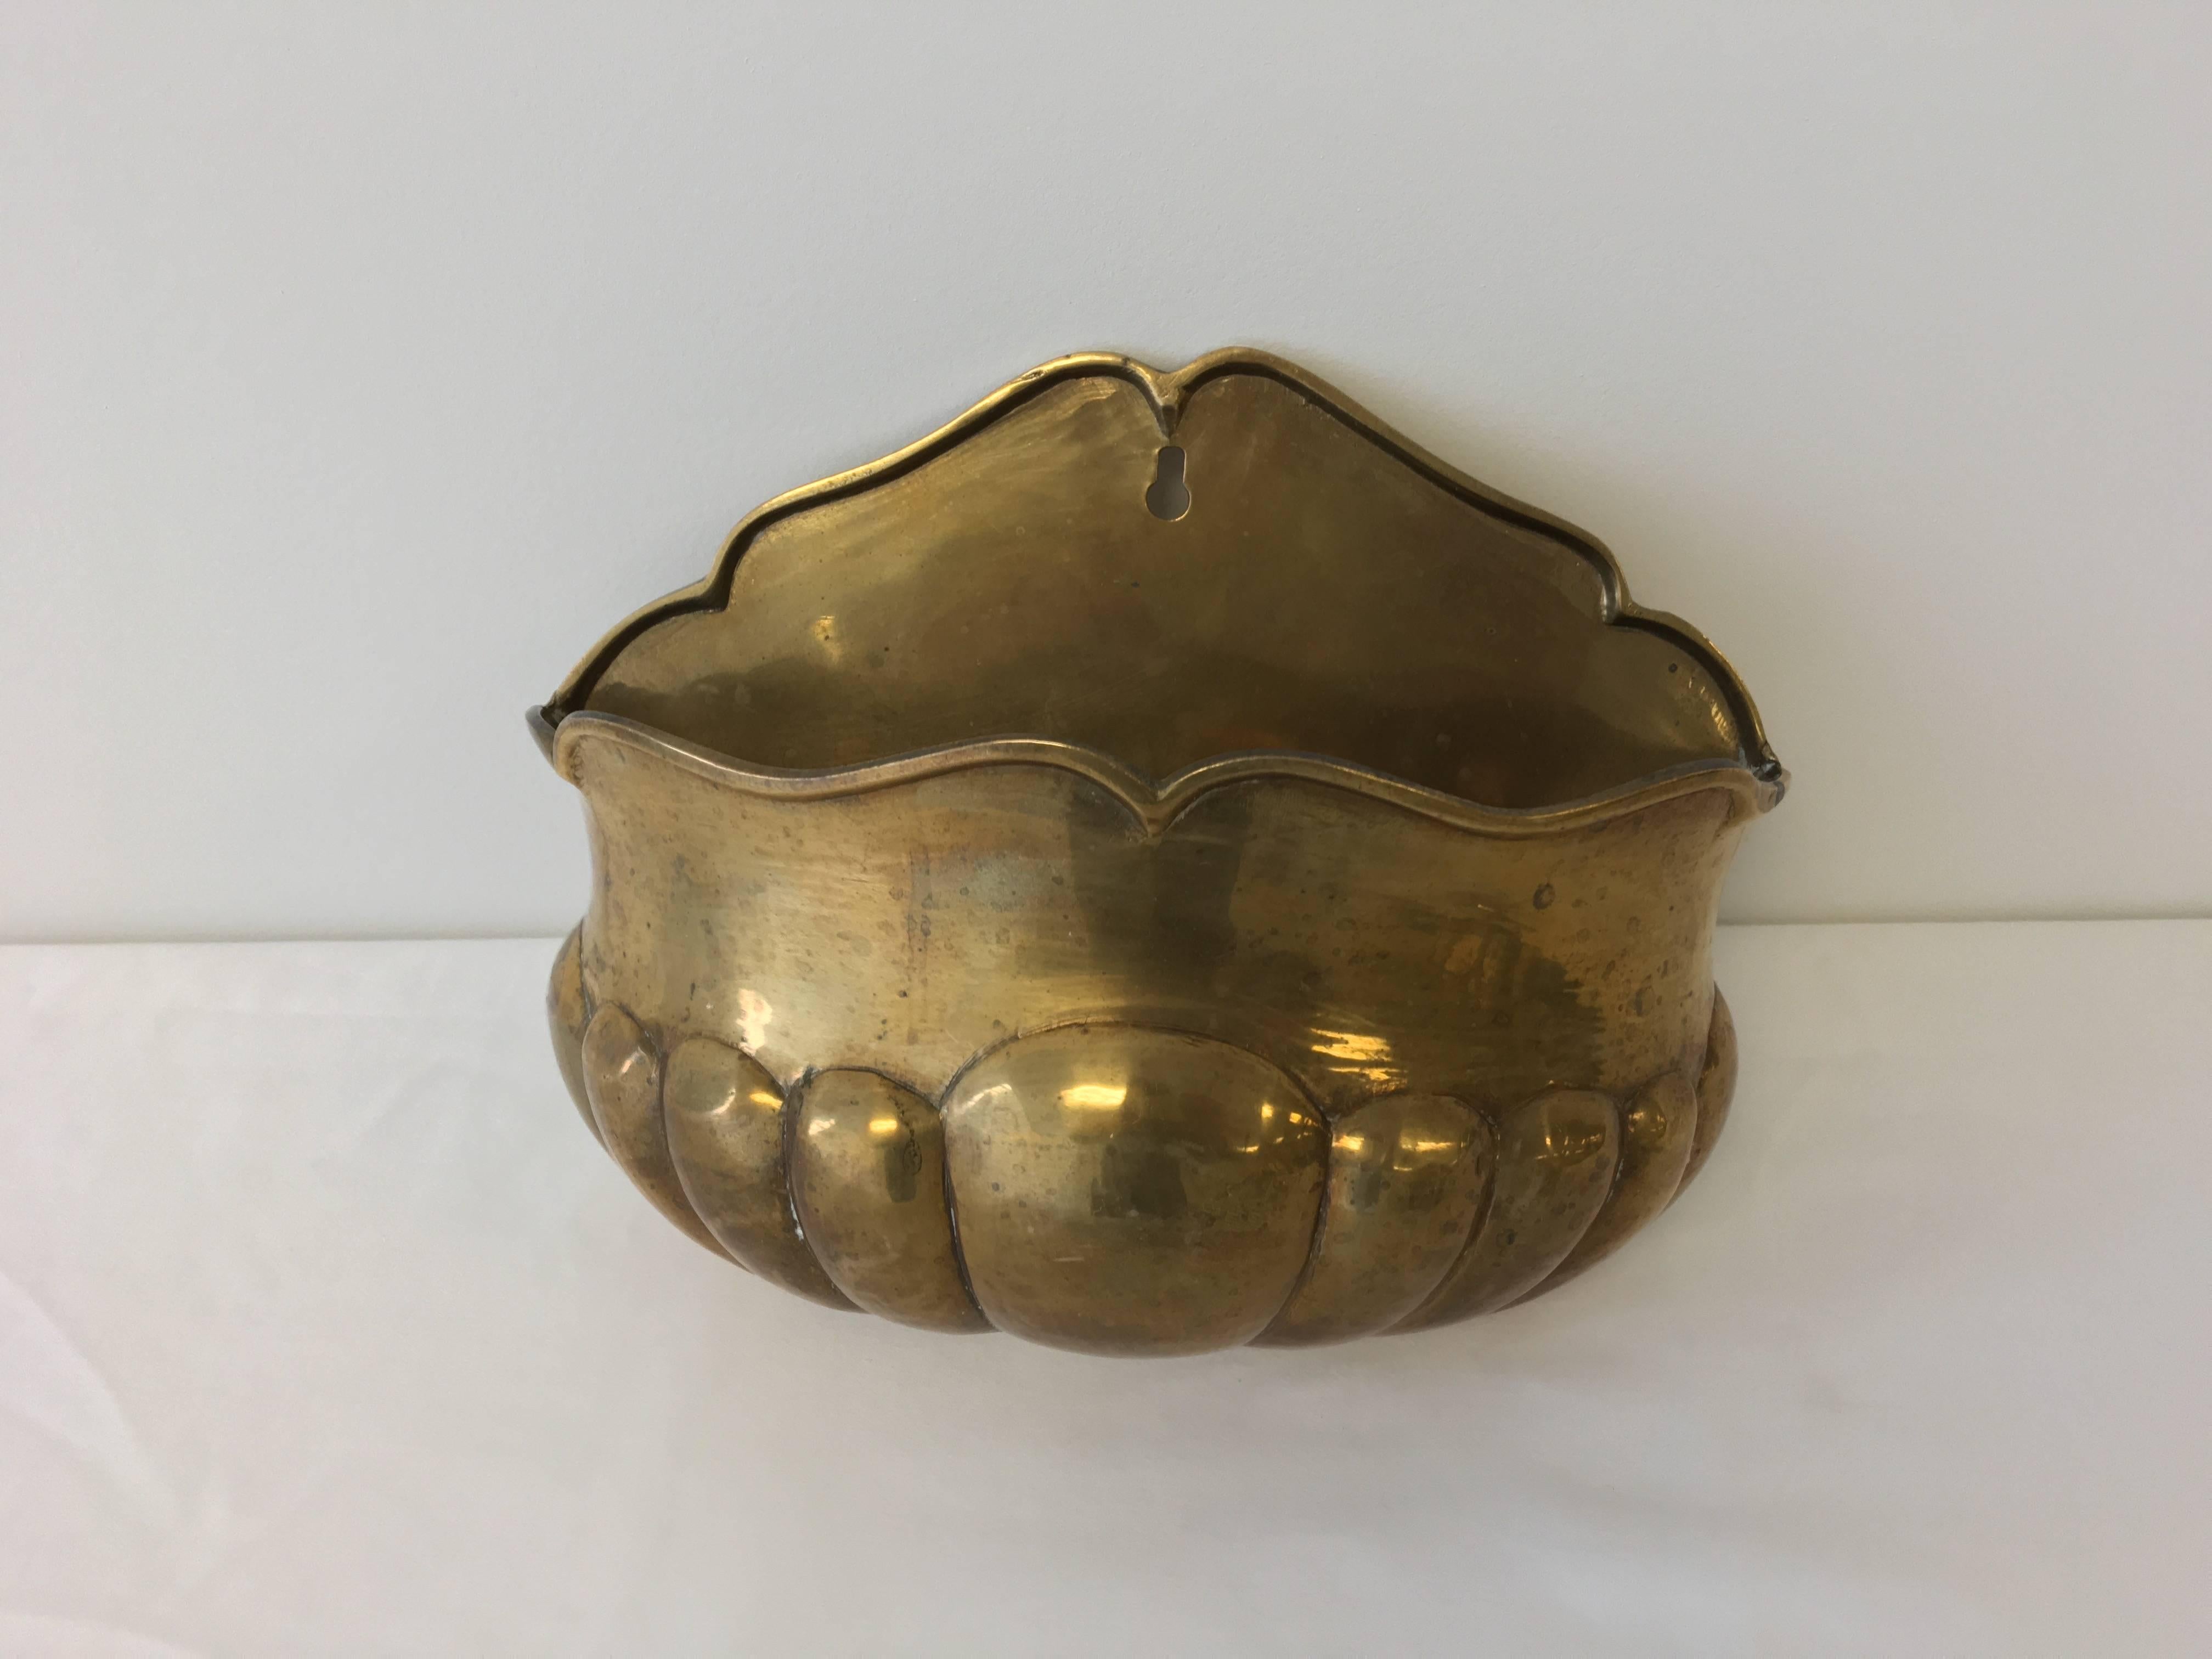 Offered is a beautiful, 1950s brass wall pocket. Substantial weight.